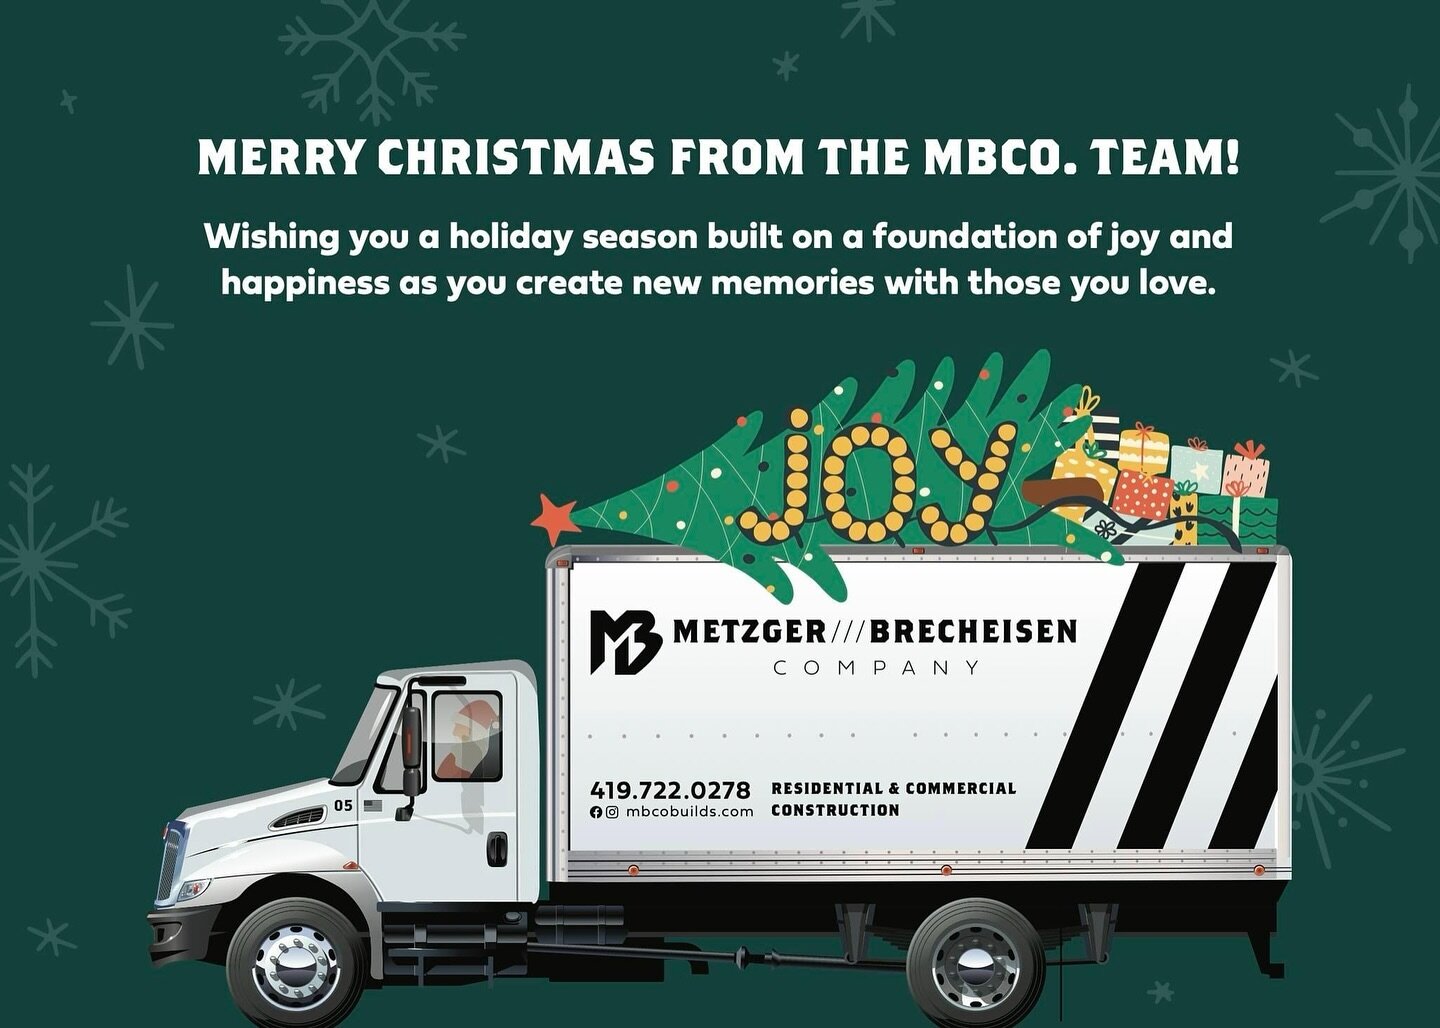 Merry Christmas from the MBCo. team! 🎄🎁 May you have a joyful holiday.